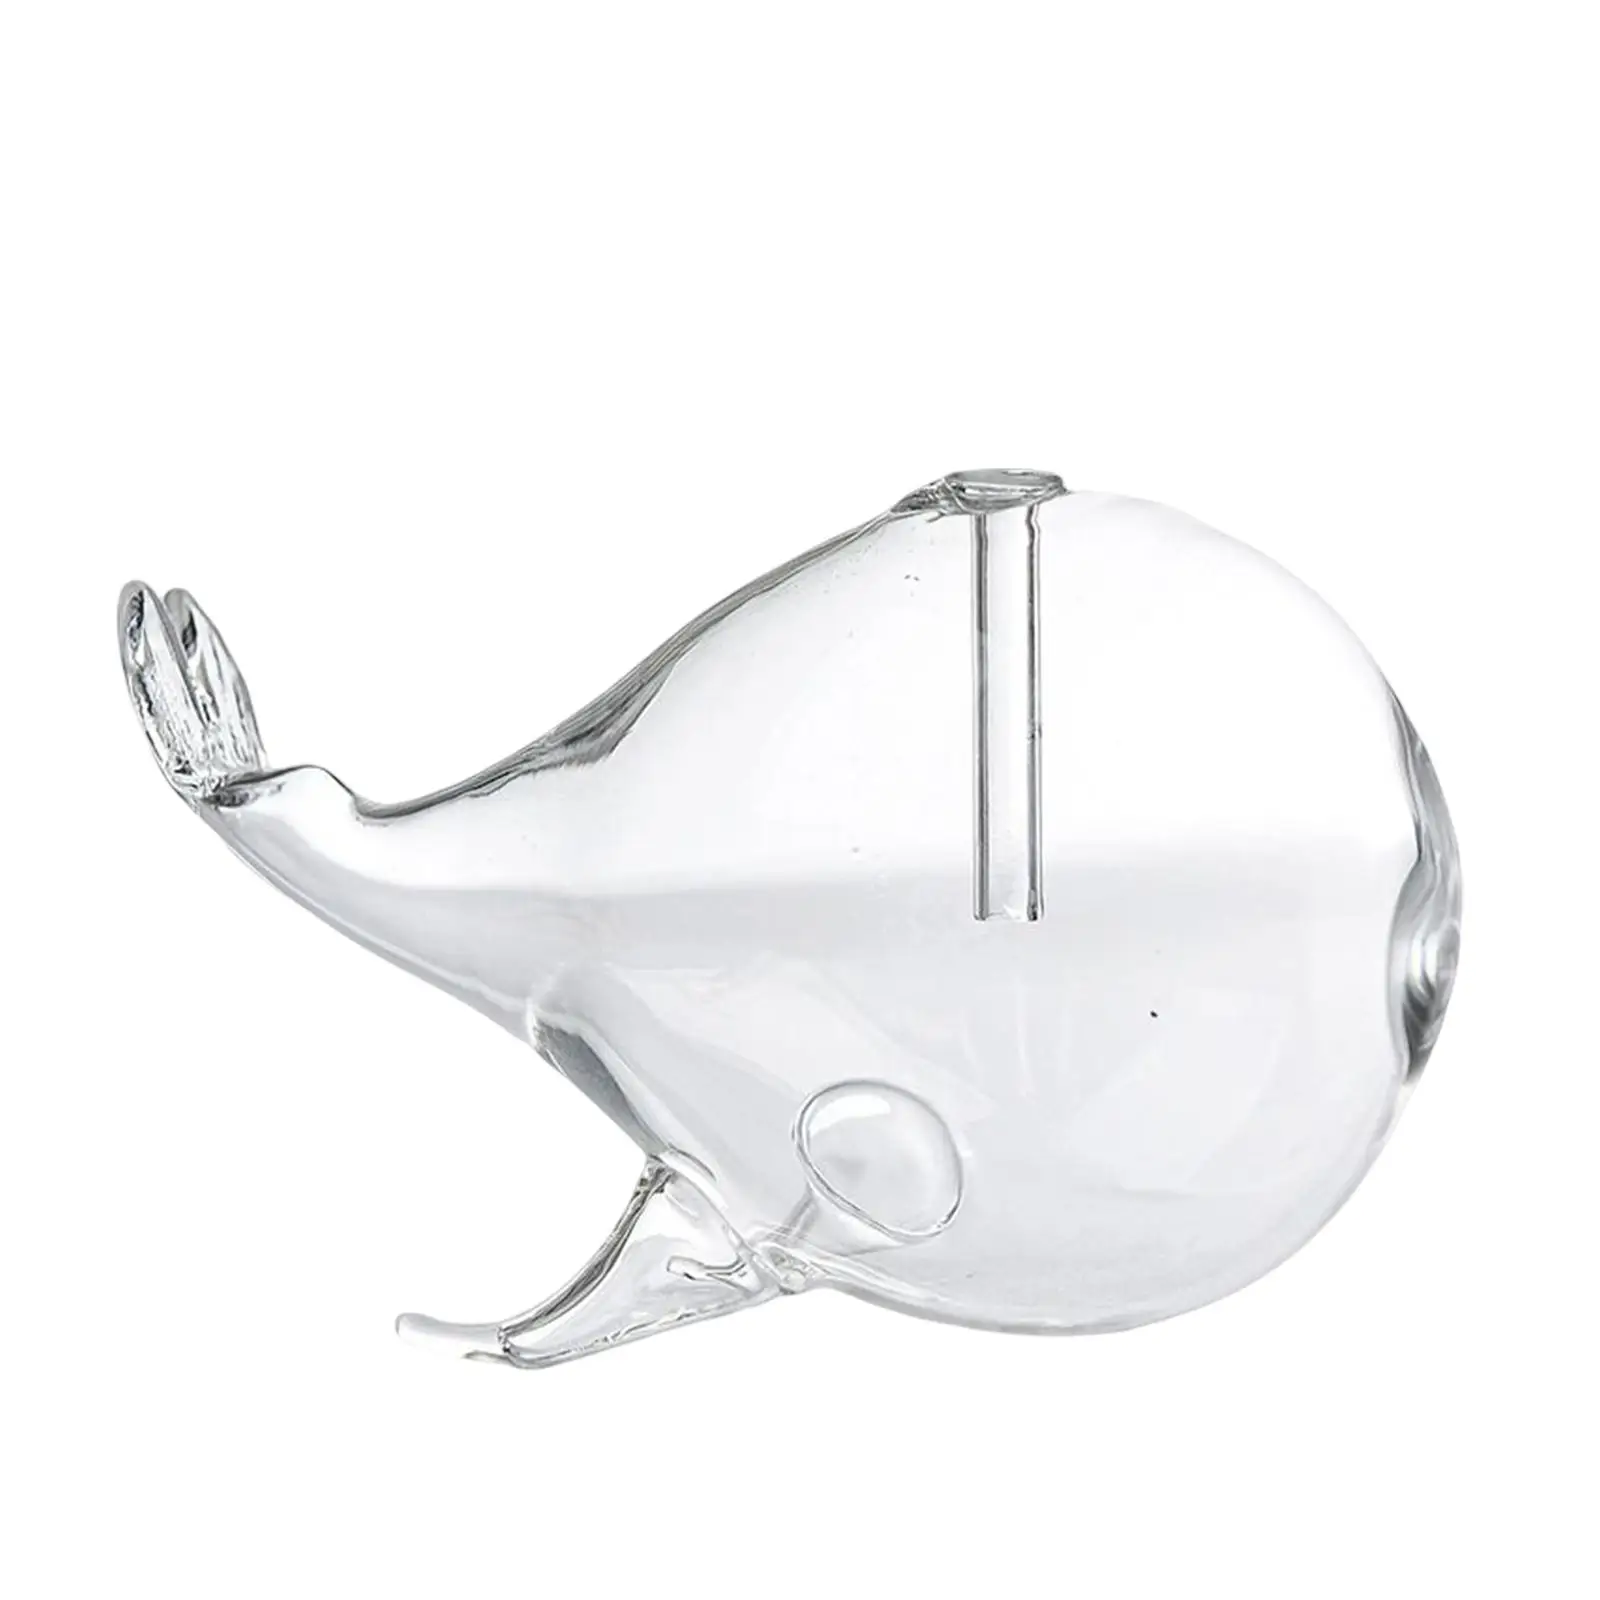 Oil Lamp Whale Design Delicate Glass Crafts for Hotel Household Housewarming